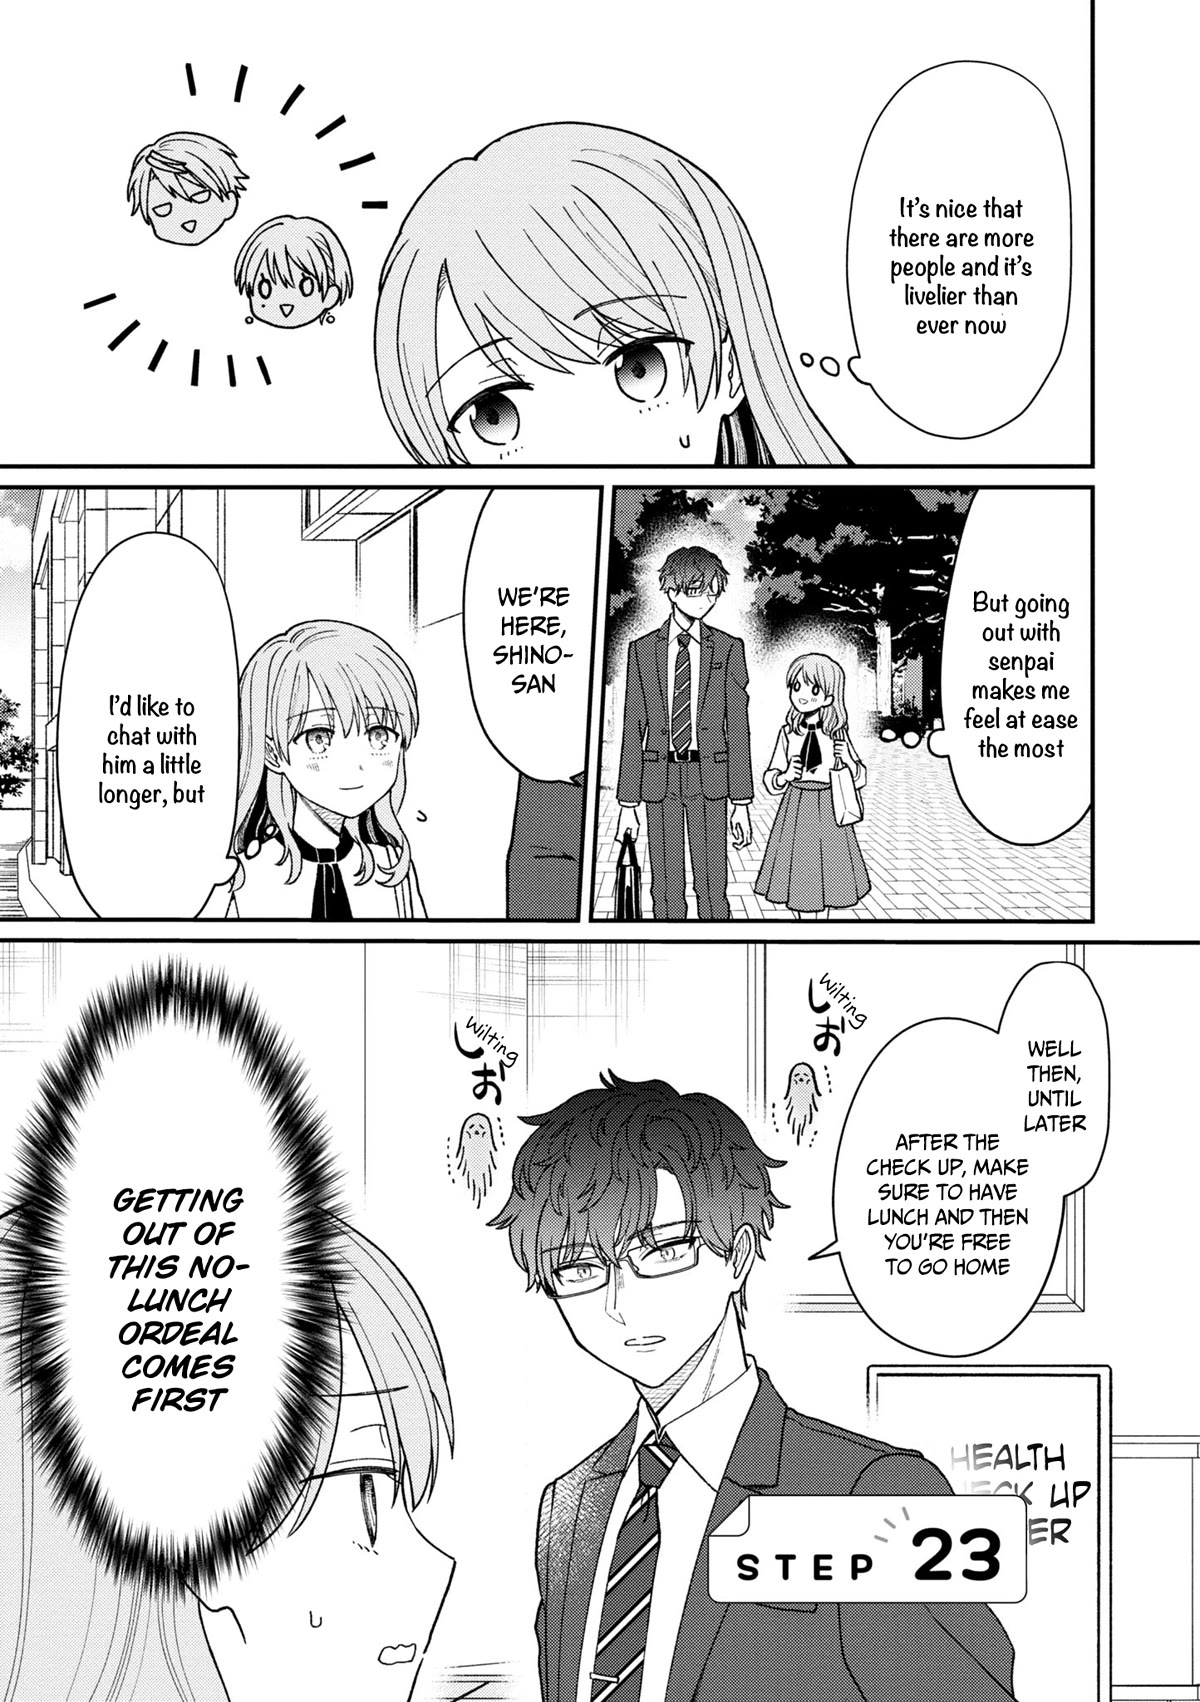 The New-Hire Who Could "Read" Emotions and the Unsociable Senpai - chapter 23 - #2